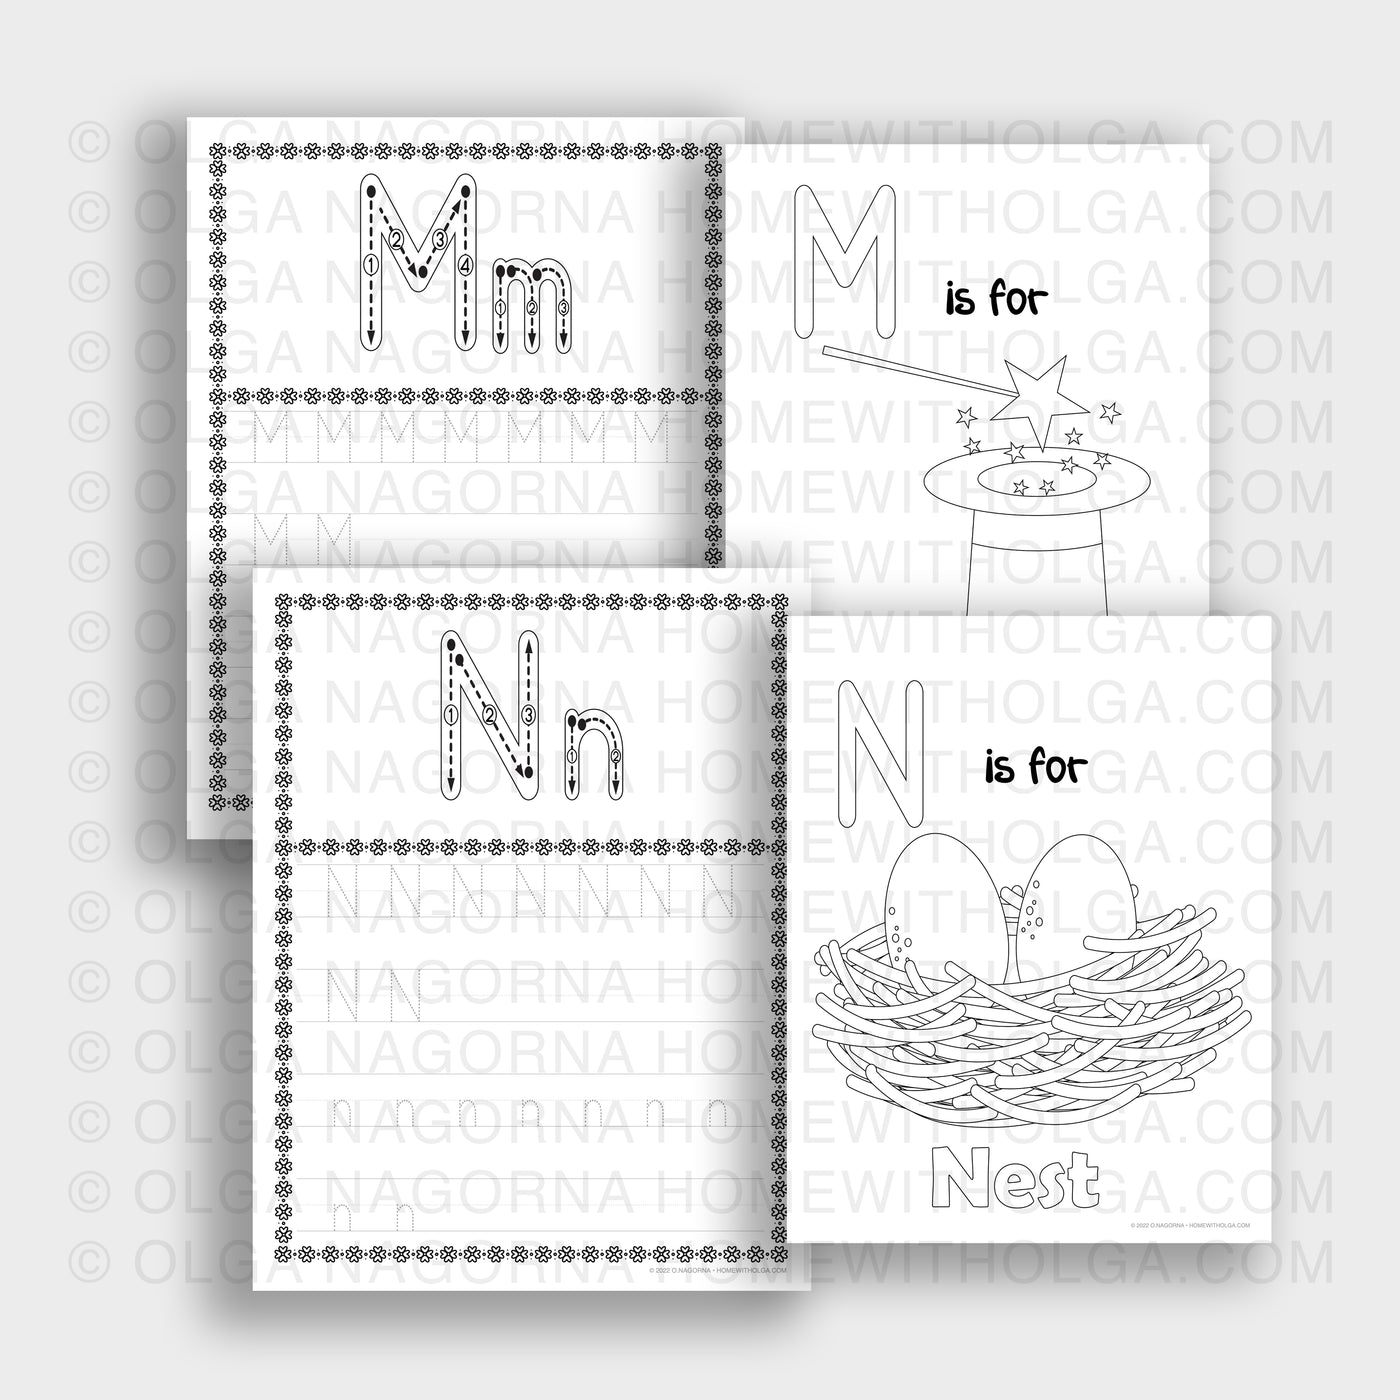 A set of full English alphabet tracing. Each letter comes with a coloring page that goes with each letter.